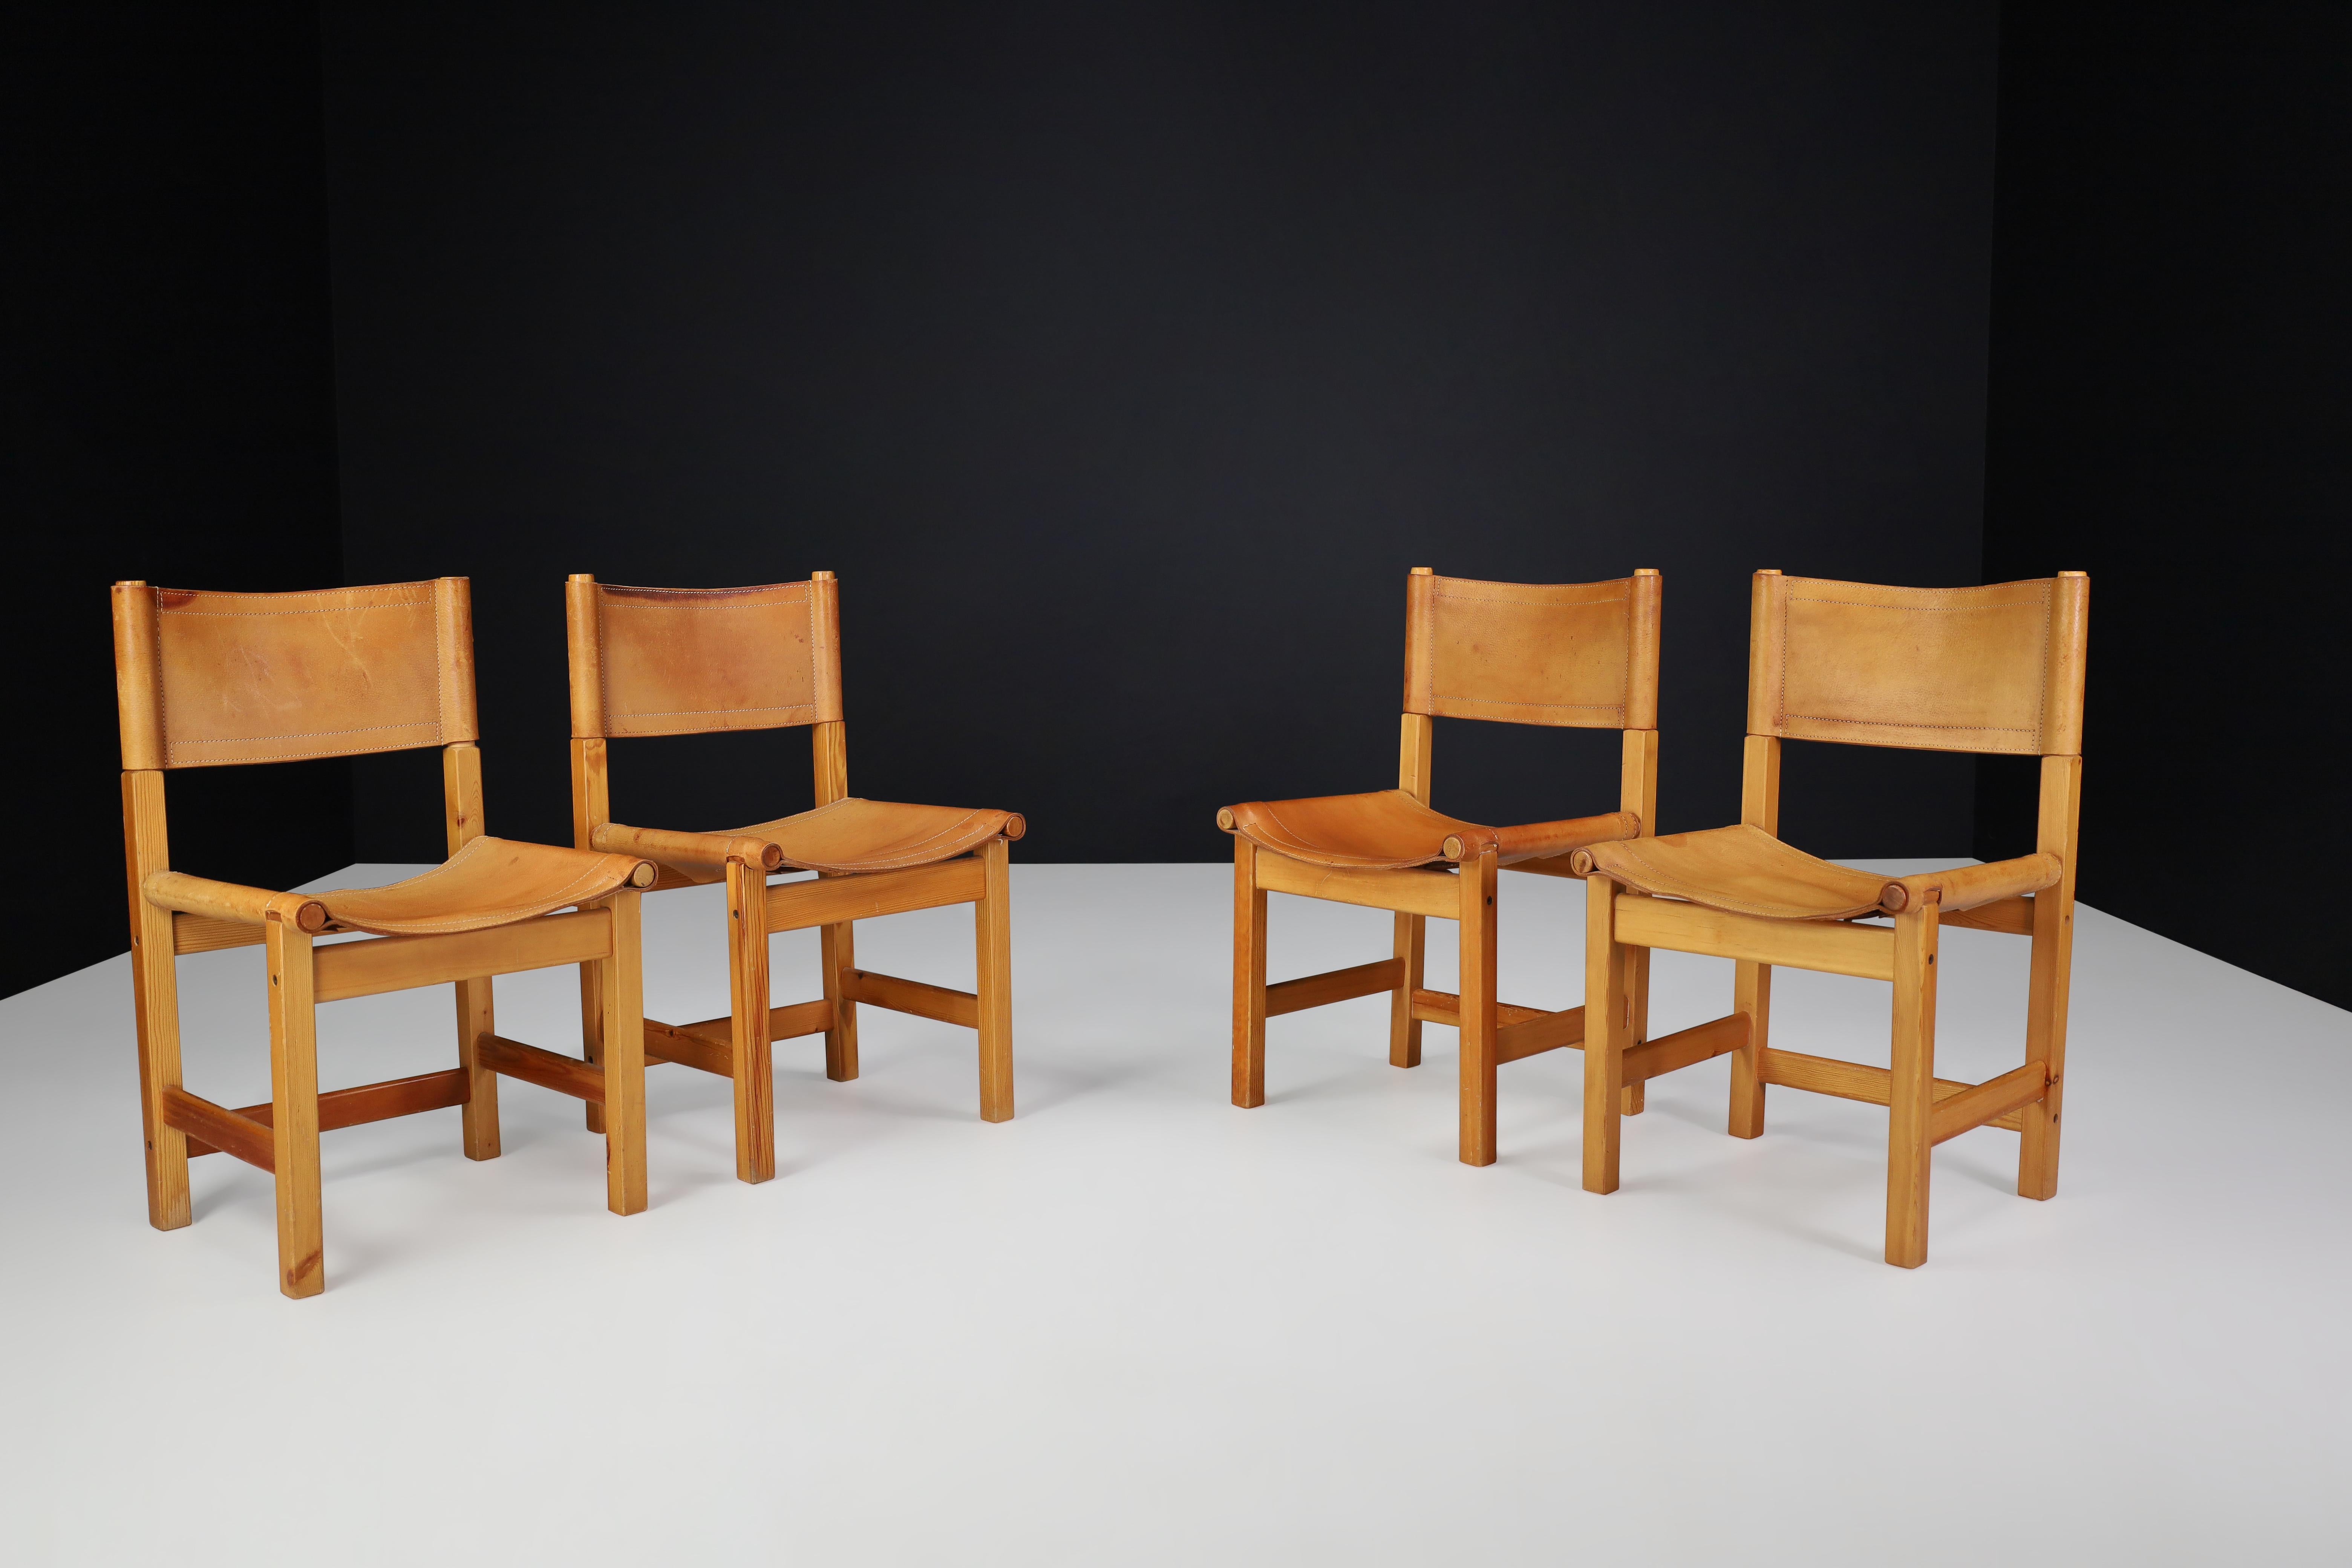 20th Century Mid Century Dining Room Chairs Pine Wood Cognac Leather Sweden 1970s Set 4 For Sale